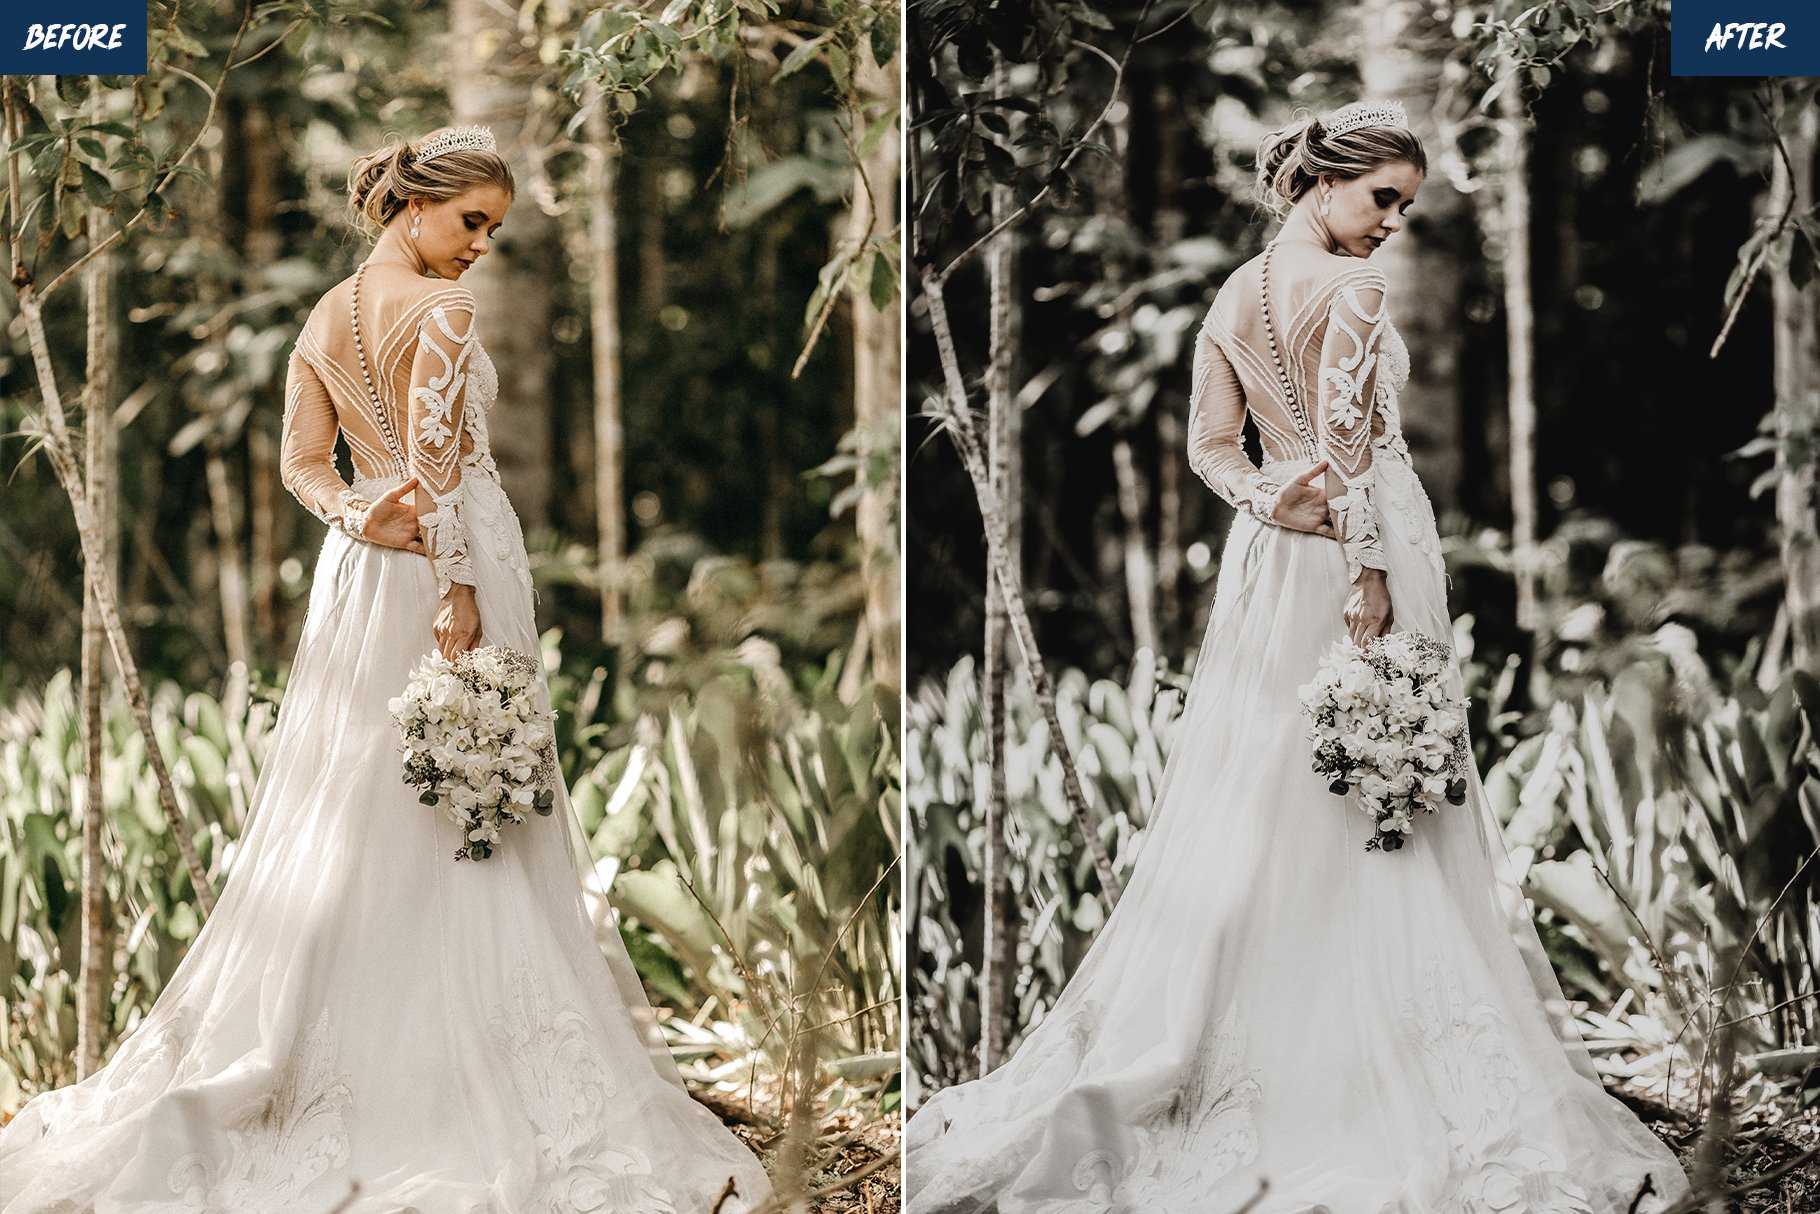 dark and moody wedding presets before and after 05 509